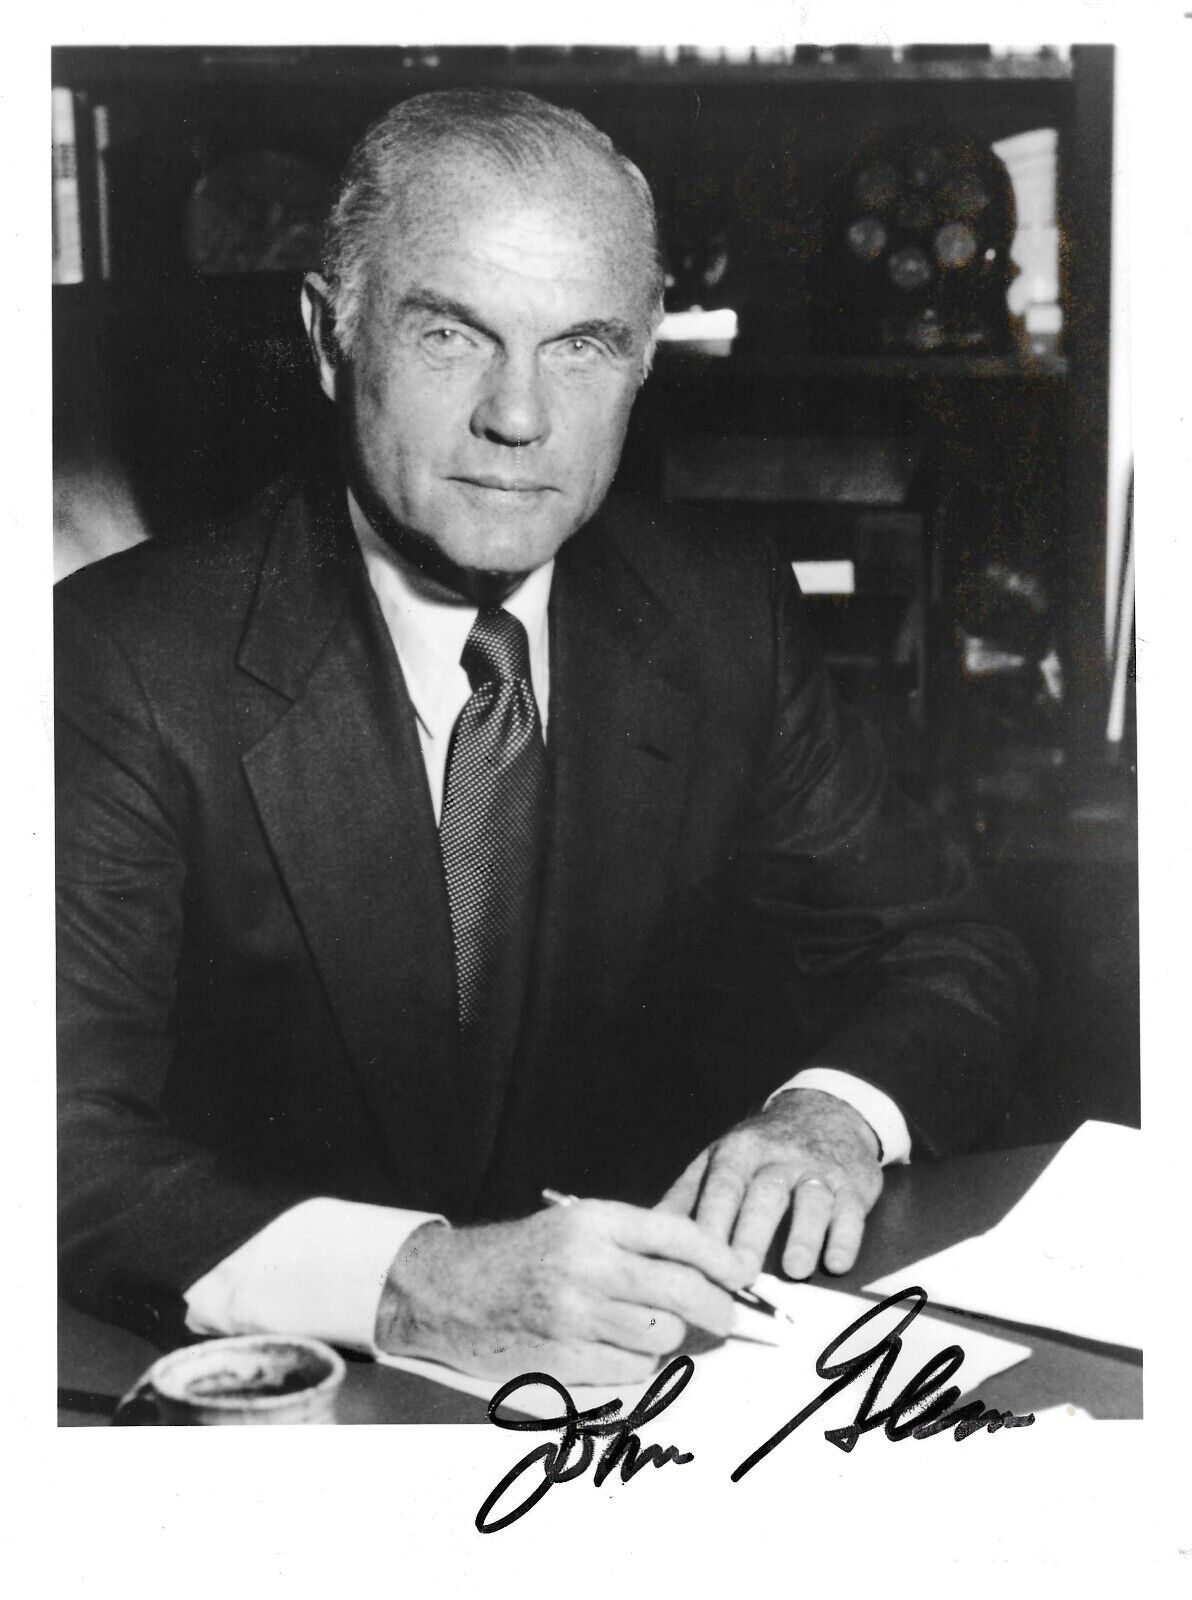 John Glenn Signed Photo with Auction House Letter of Authenticity.